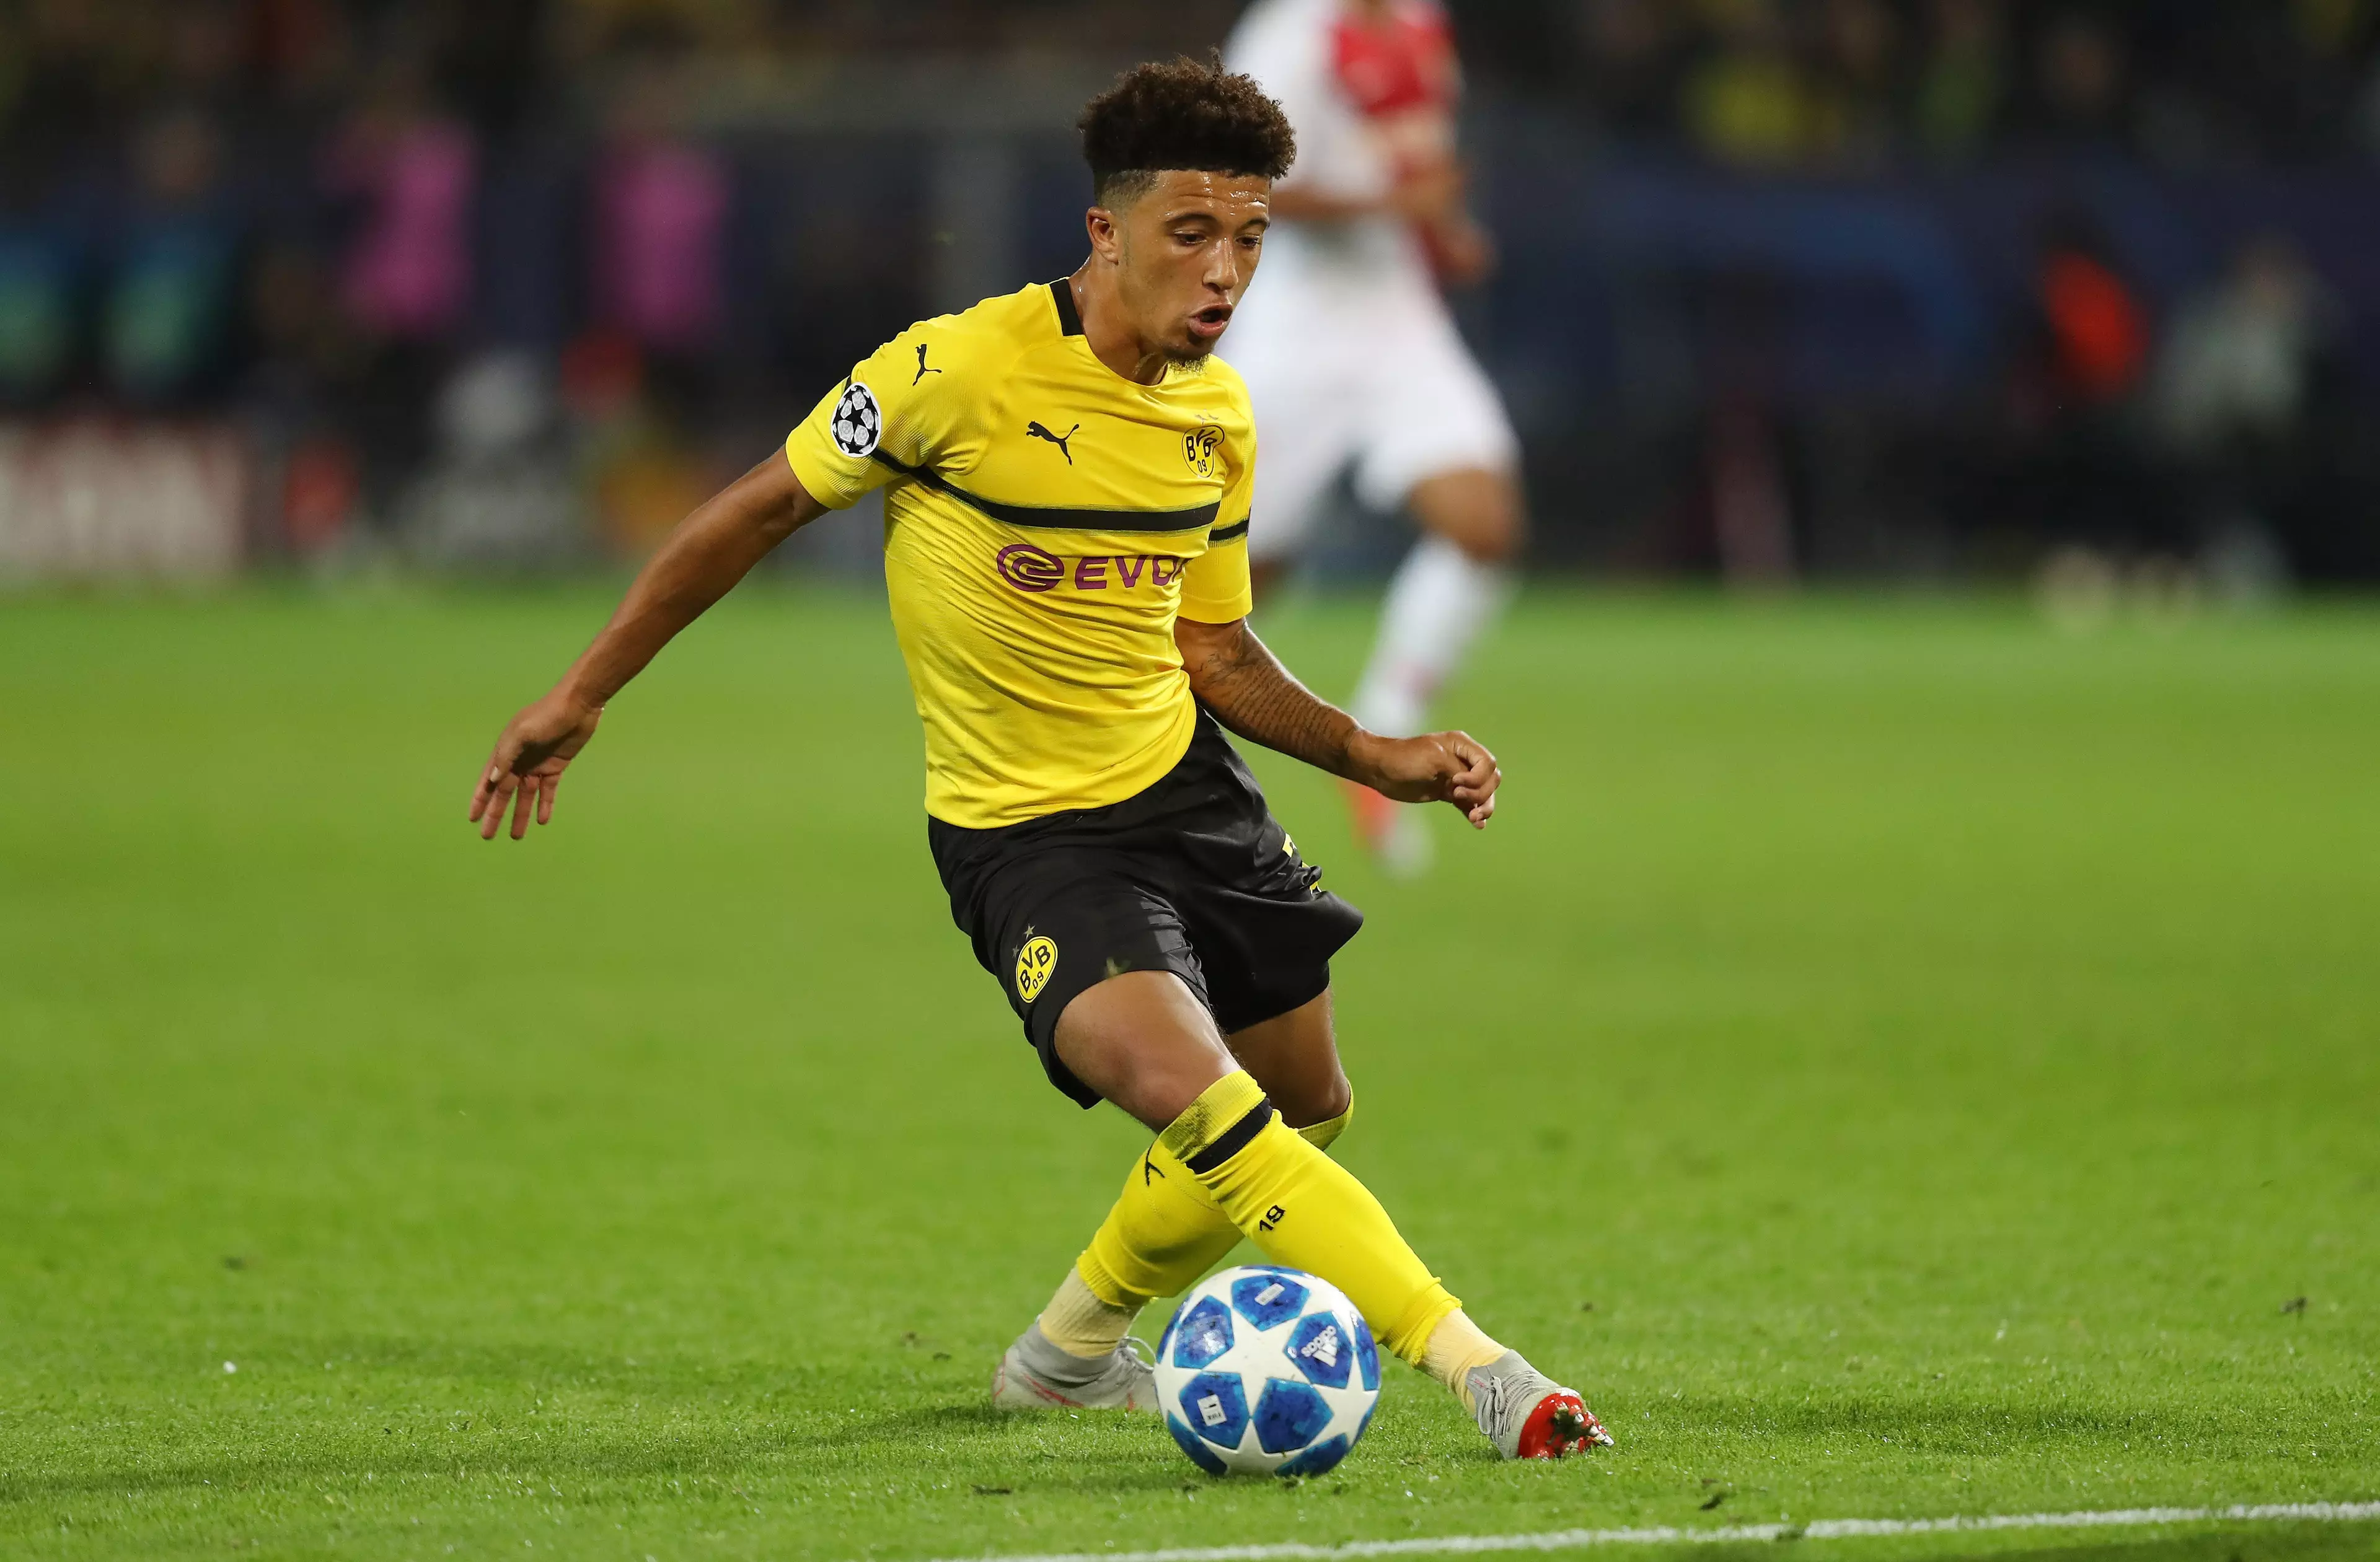 Jadon Sancho has been linked with a big money move this summer. Image: PA Images